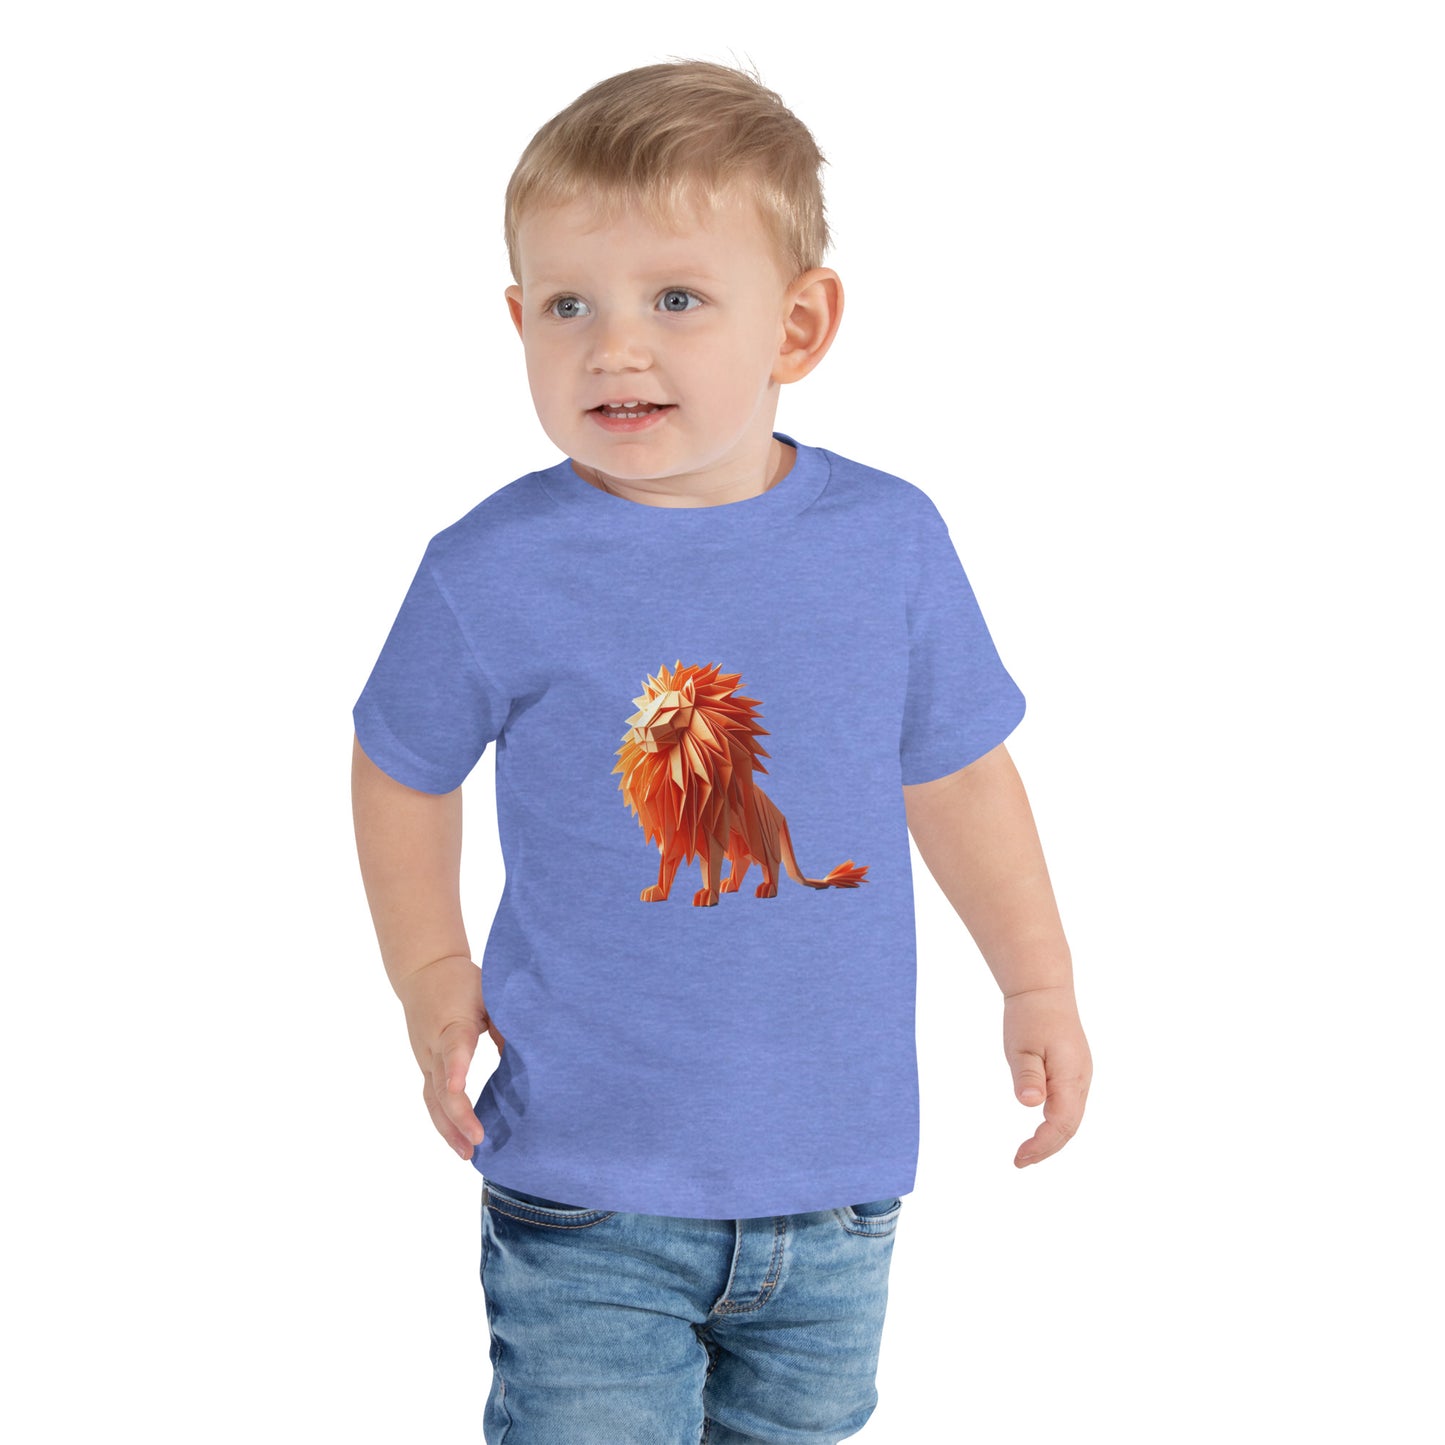 Toddler with a columbia blue T-shirt with a print of a lion